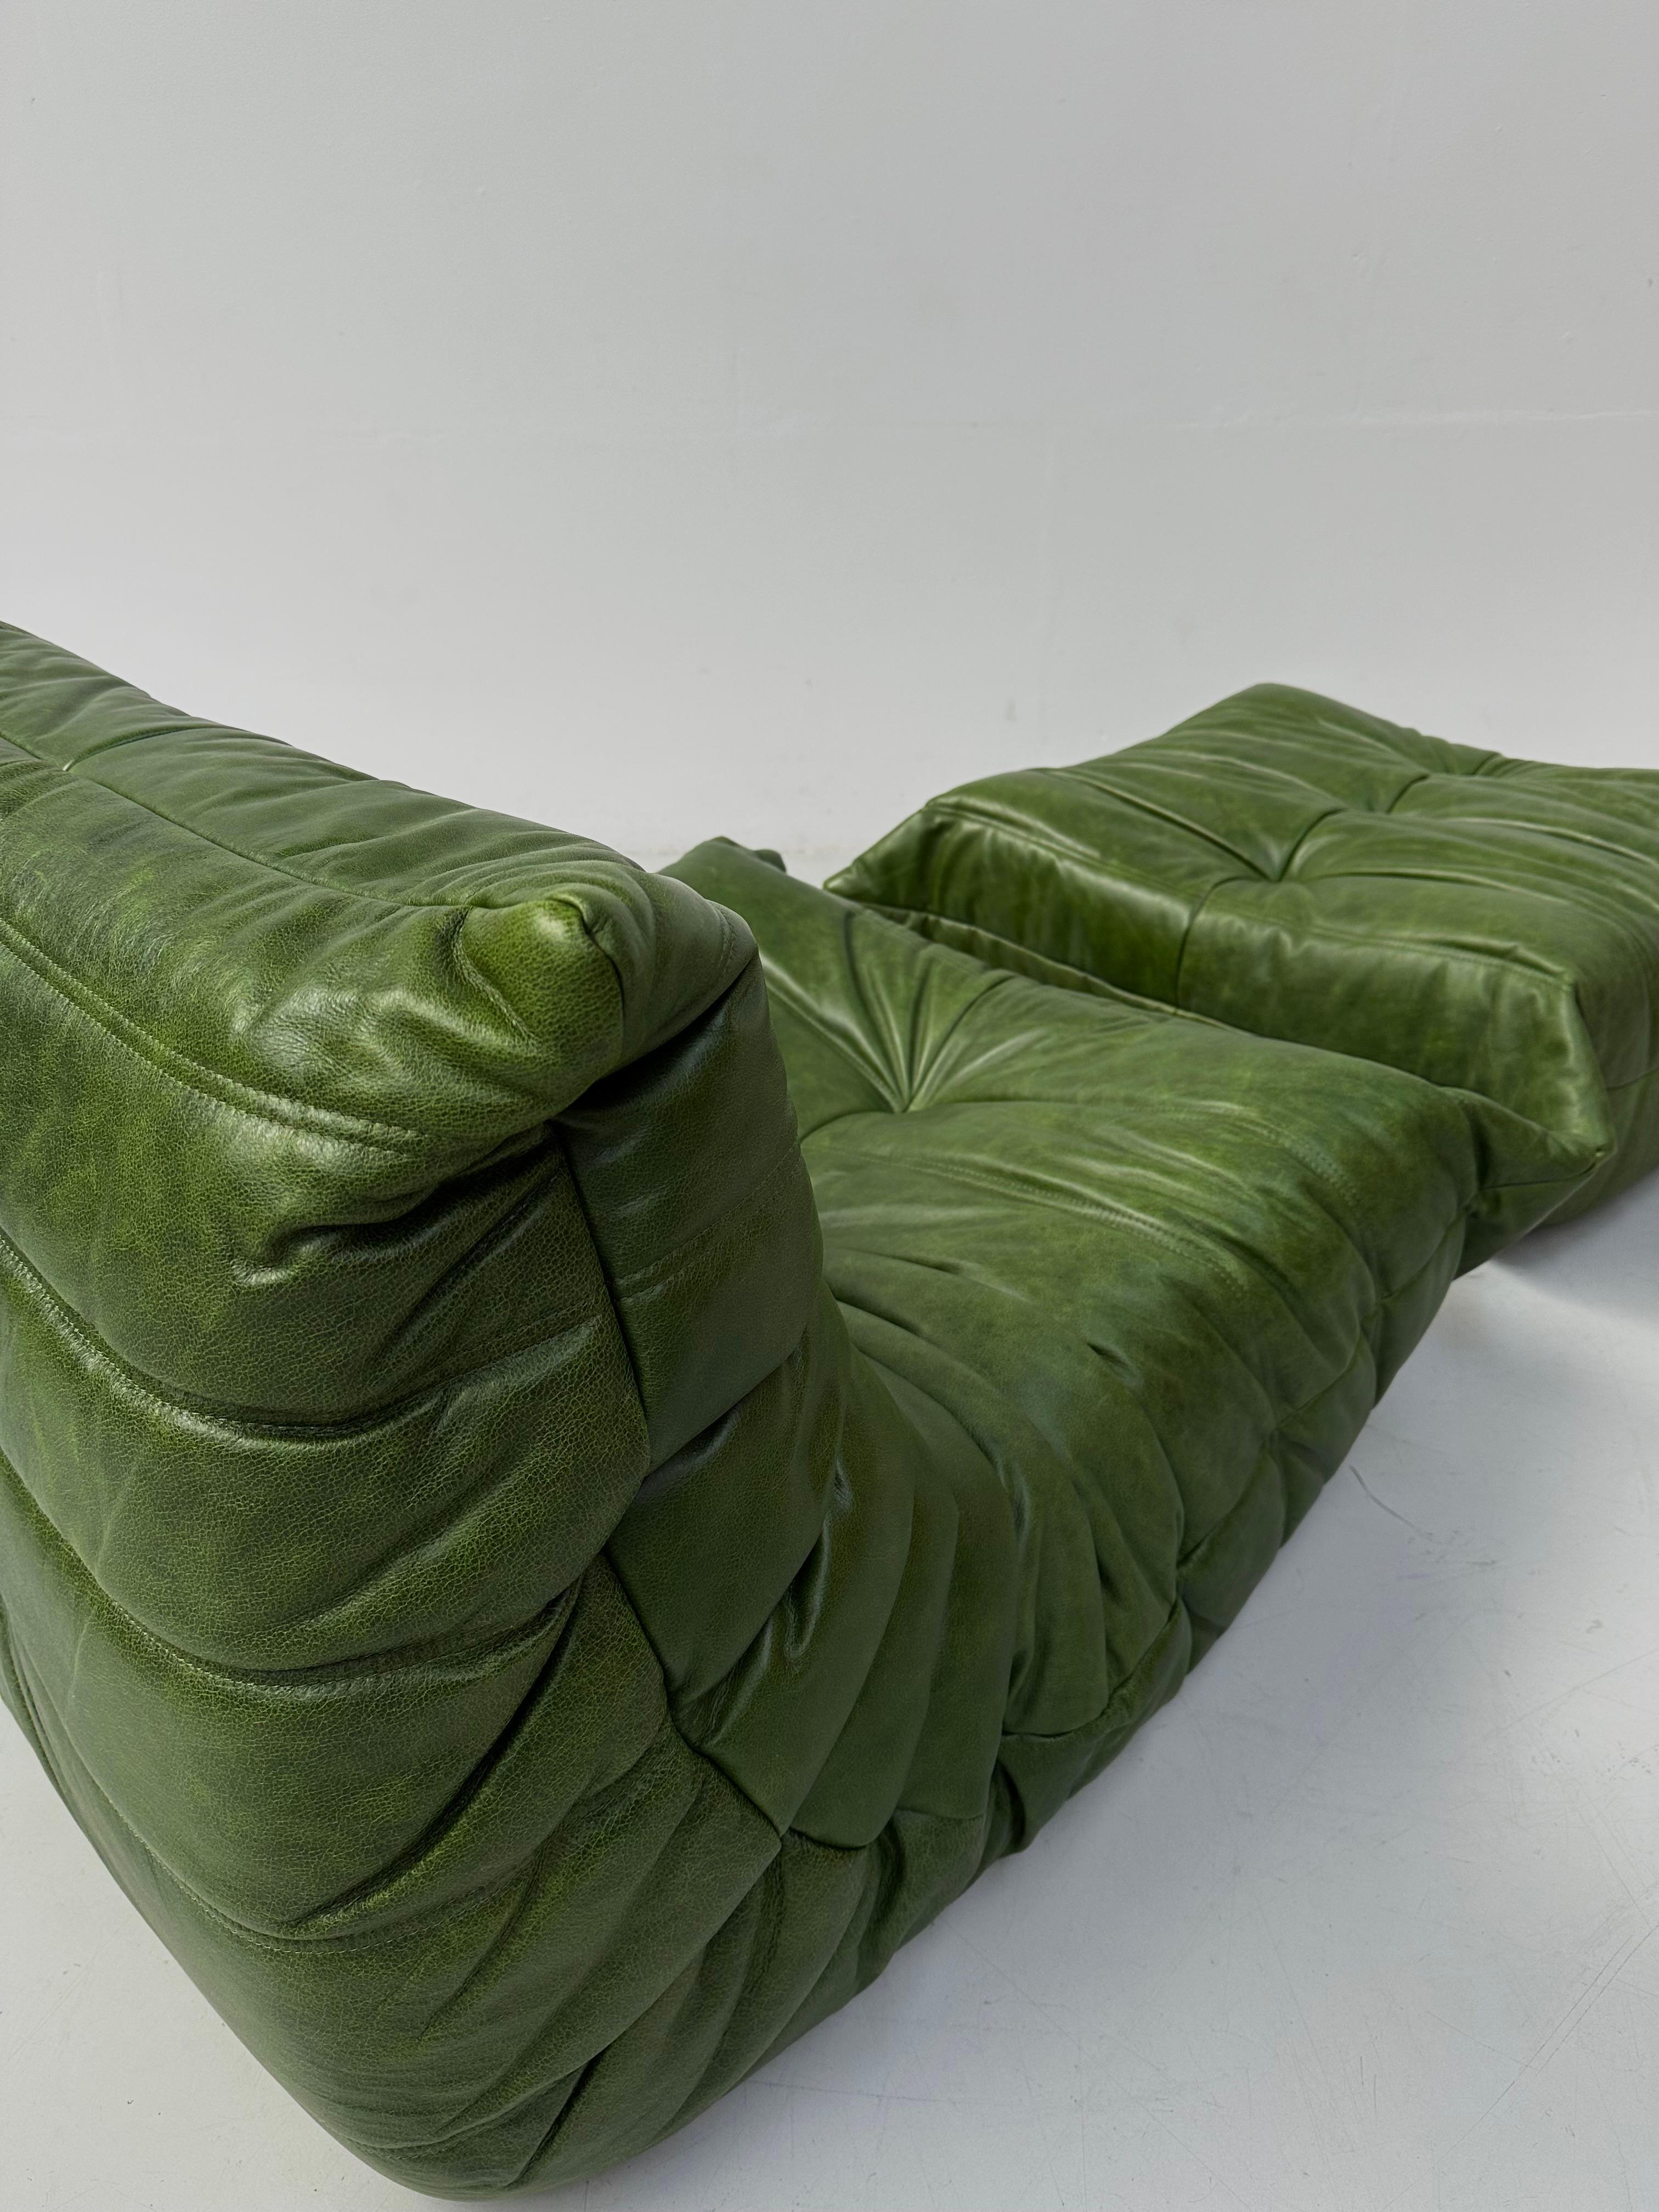 Foam French Togo Chair and Ottoman in Green Leather by M. Ducaroy for Ligne Roset.